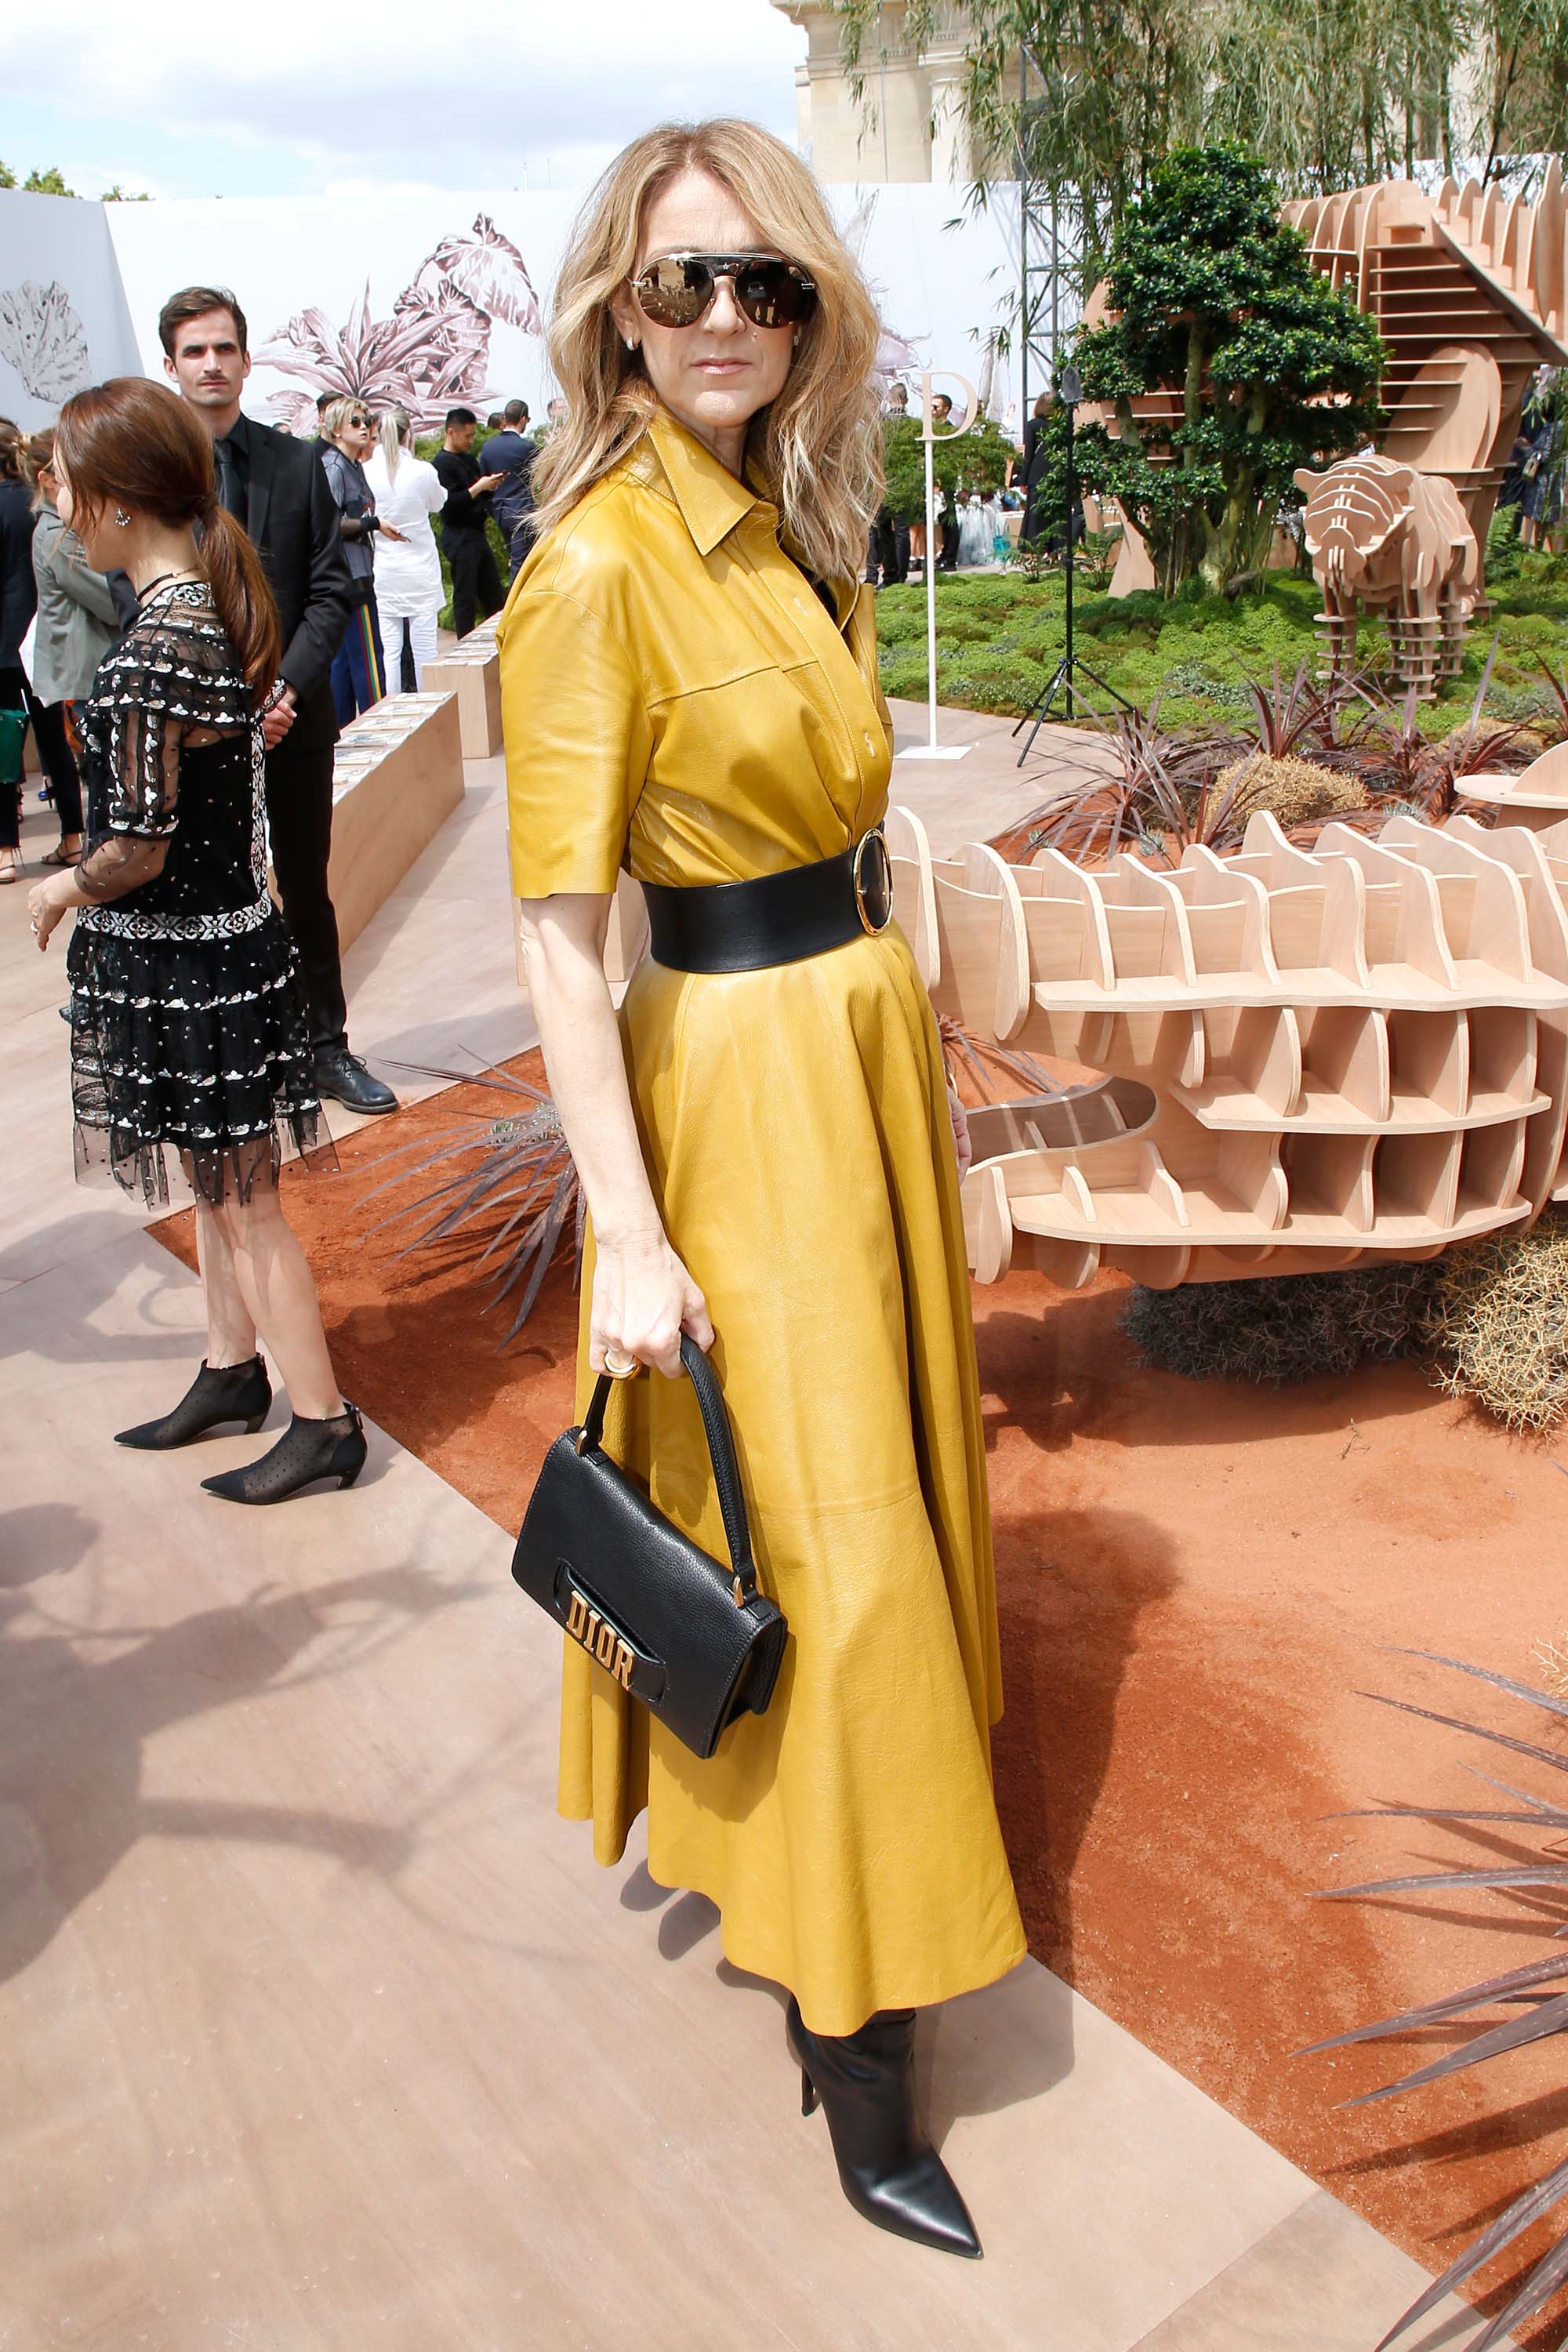 Celine Dion attends Christian Dior show